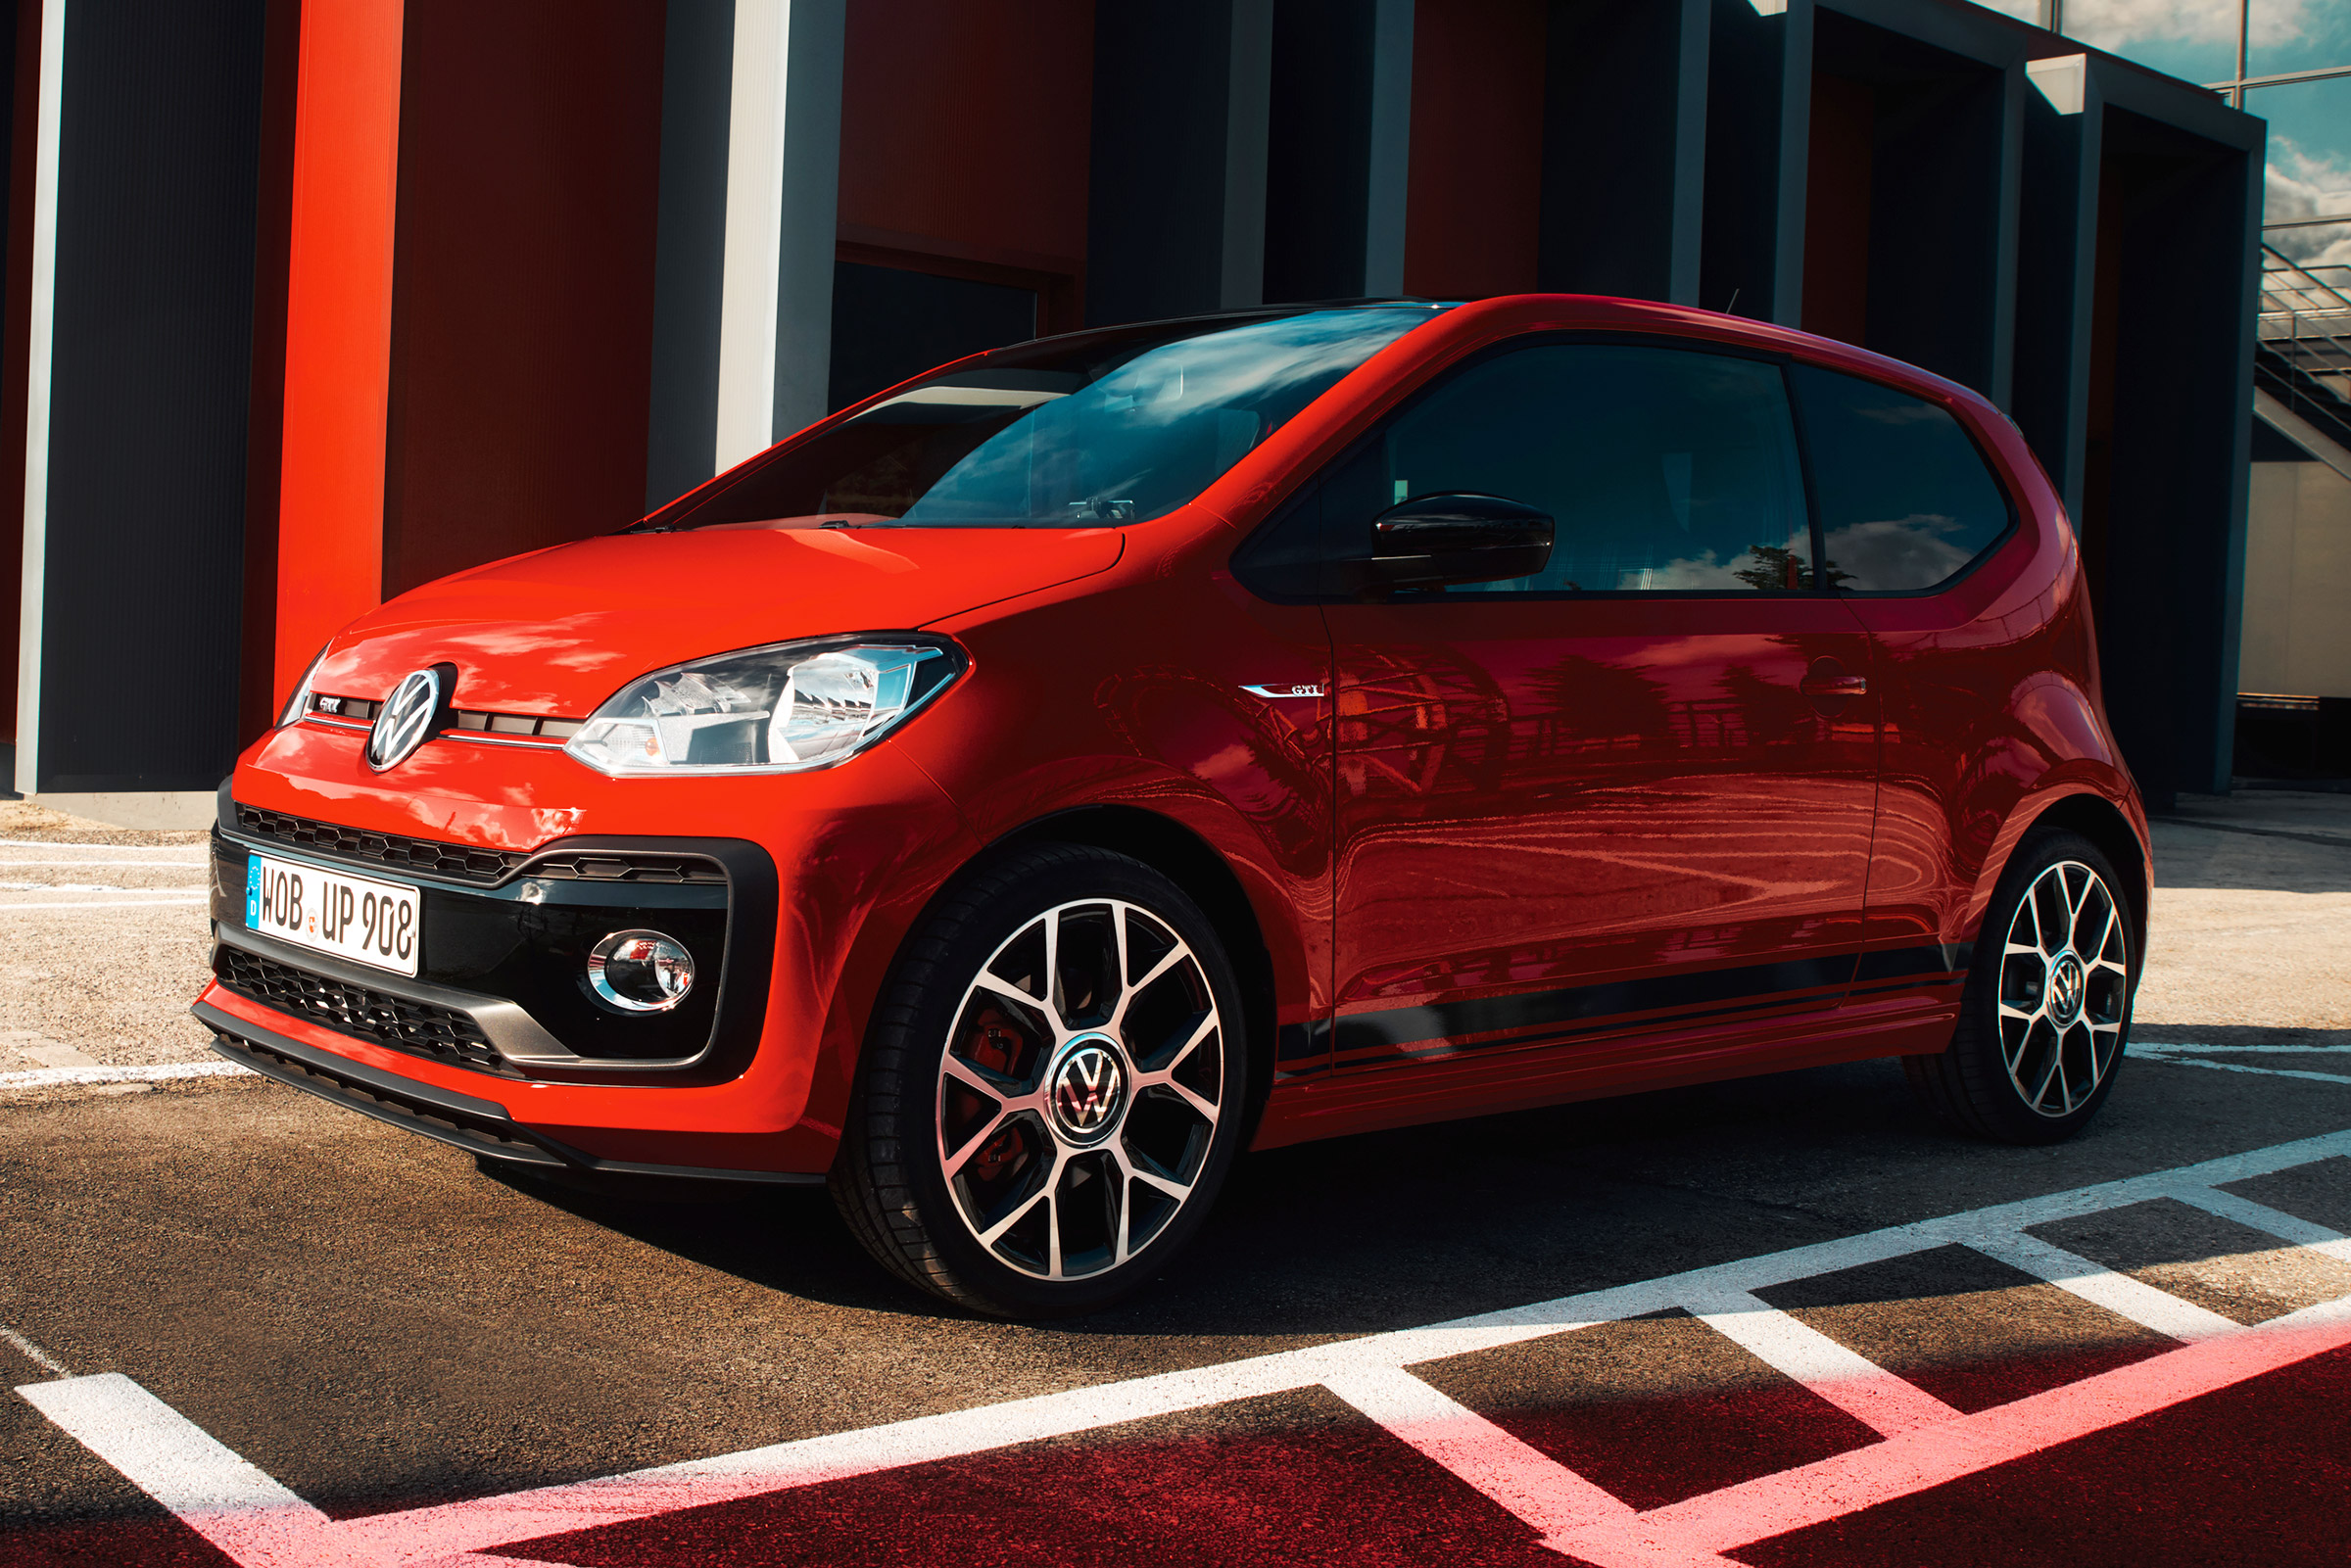 Rejoice, the VW up! GTI is back in the UK Auto Express